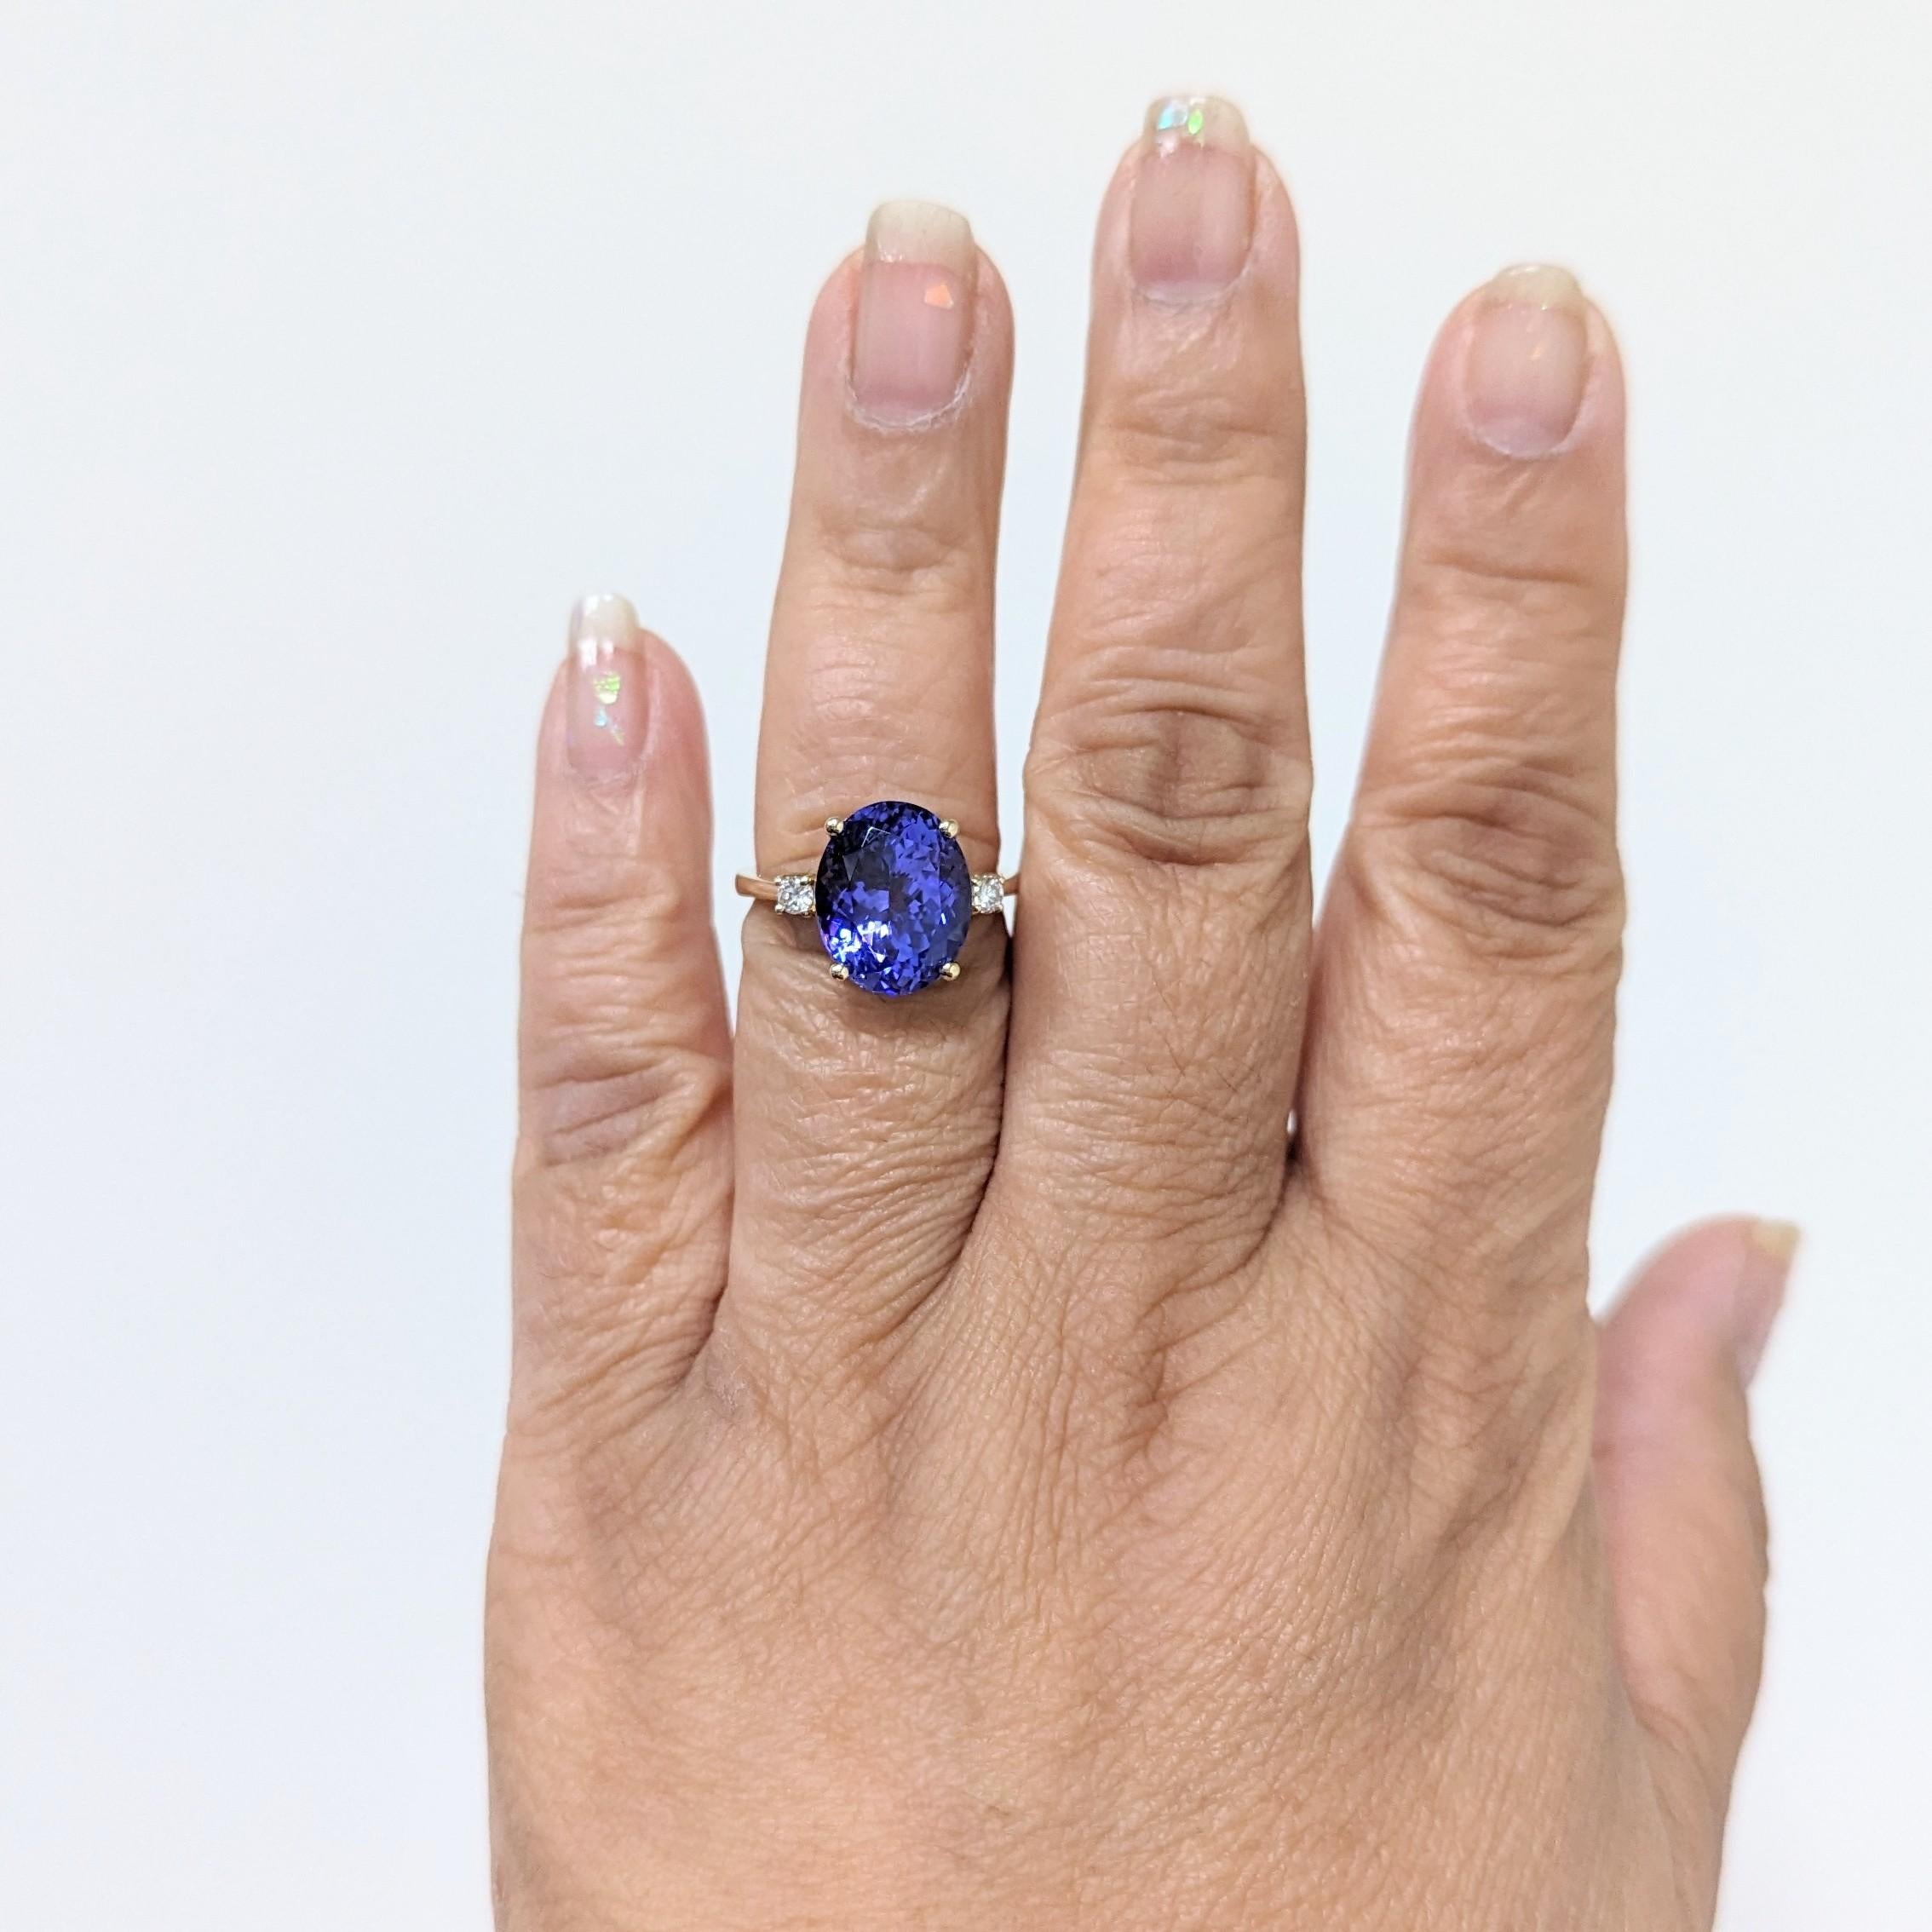 Beautiful 8.02 ct. tanzanite oval with 0.05 ct. good quality white diamond rounds.  Handmade in 14k yellow gold.  Ring size 7.25.